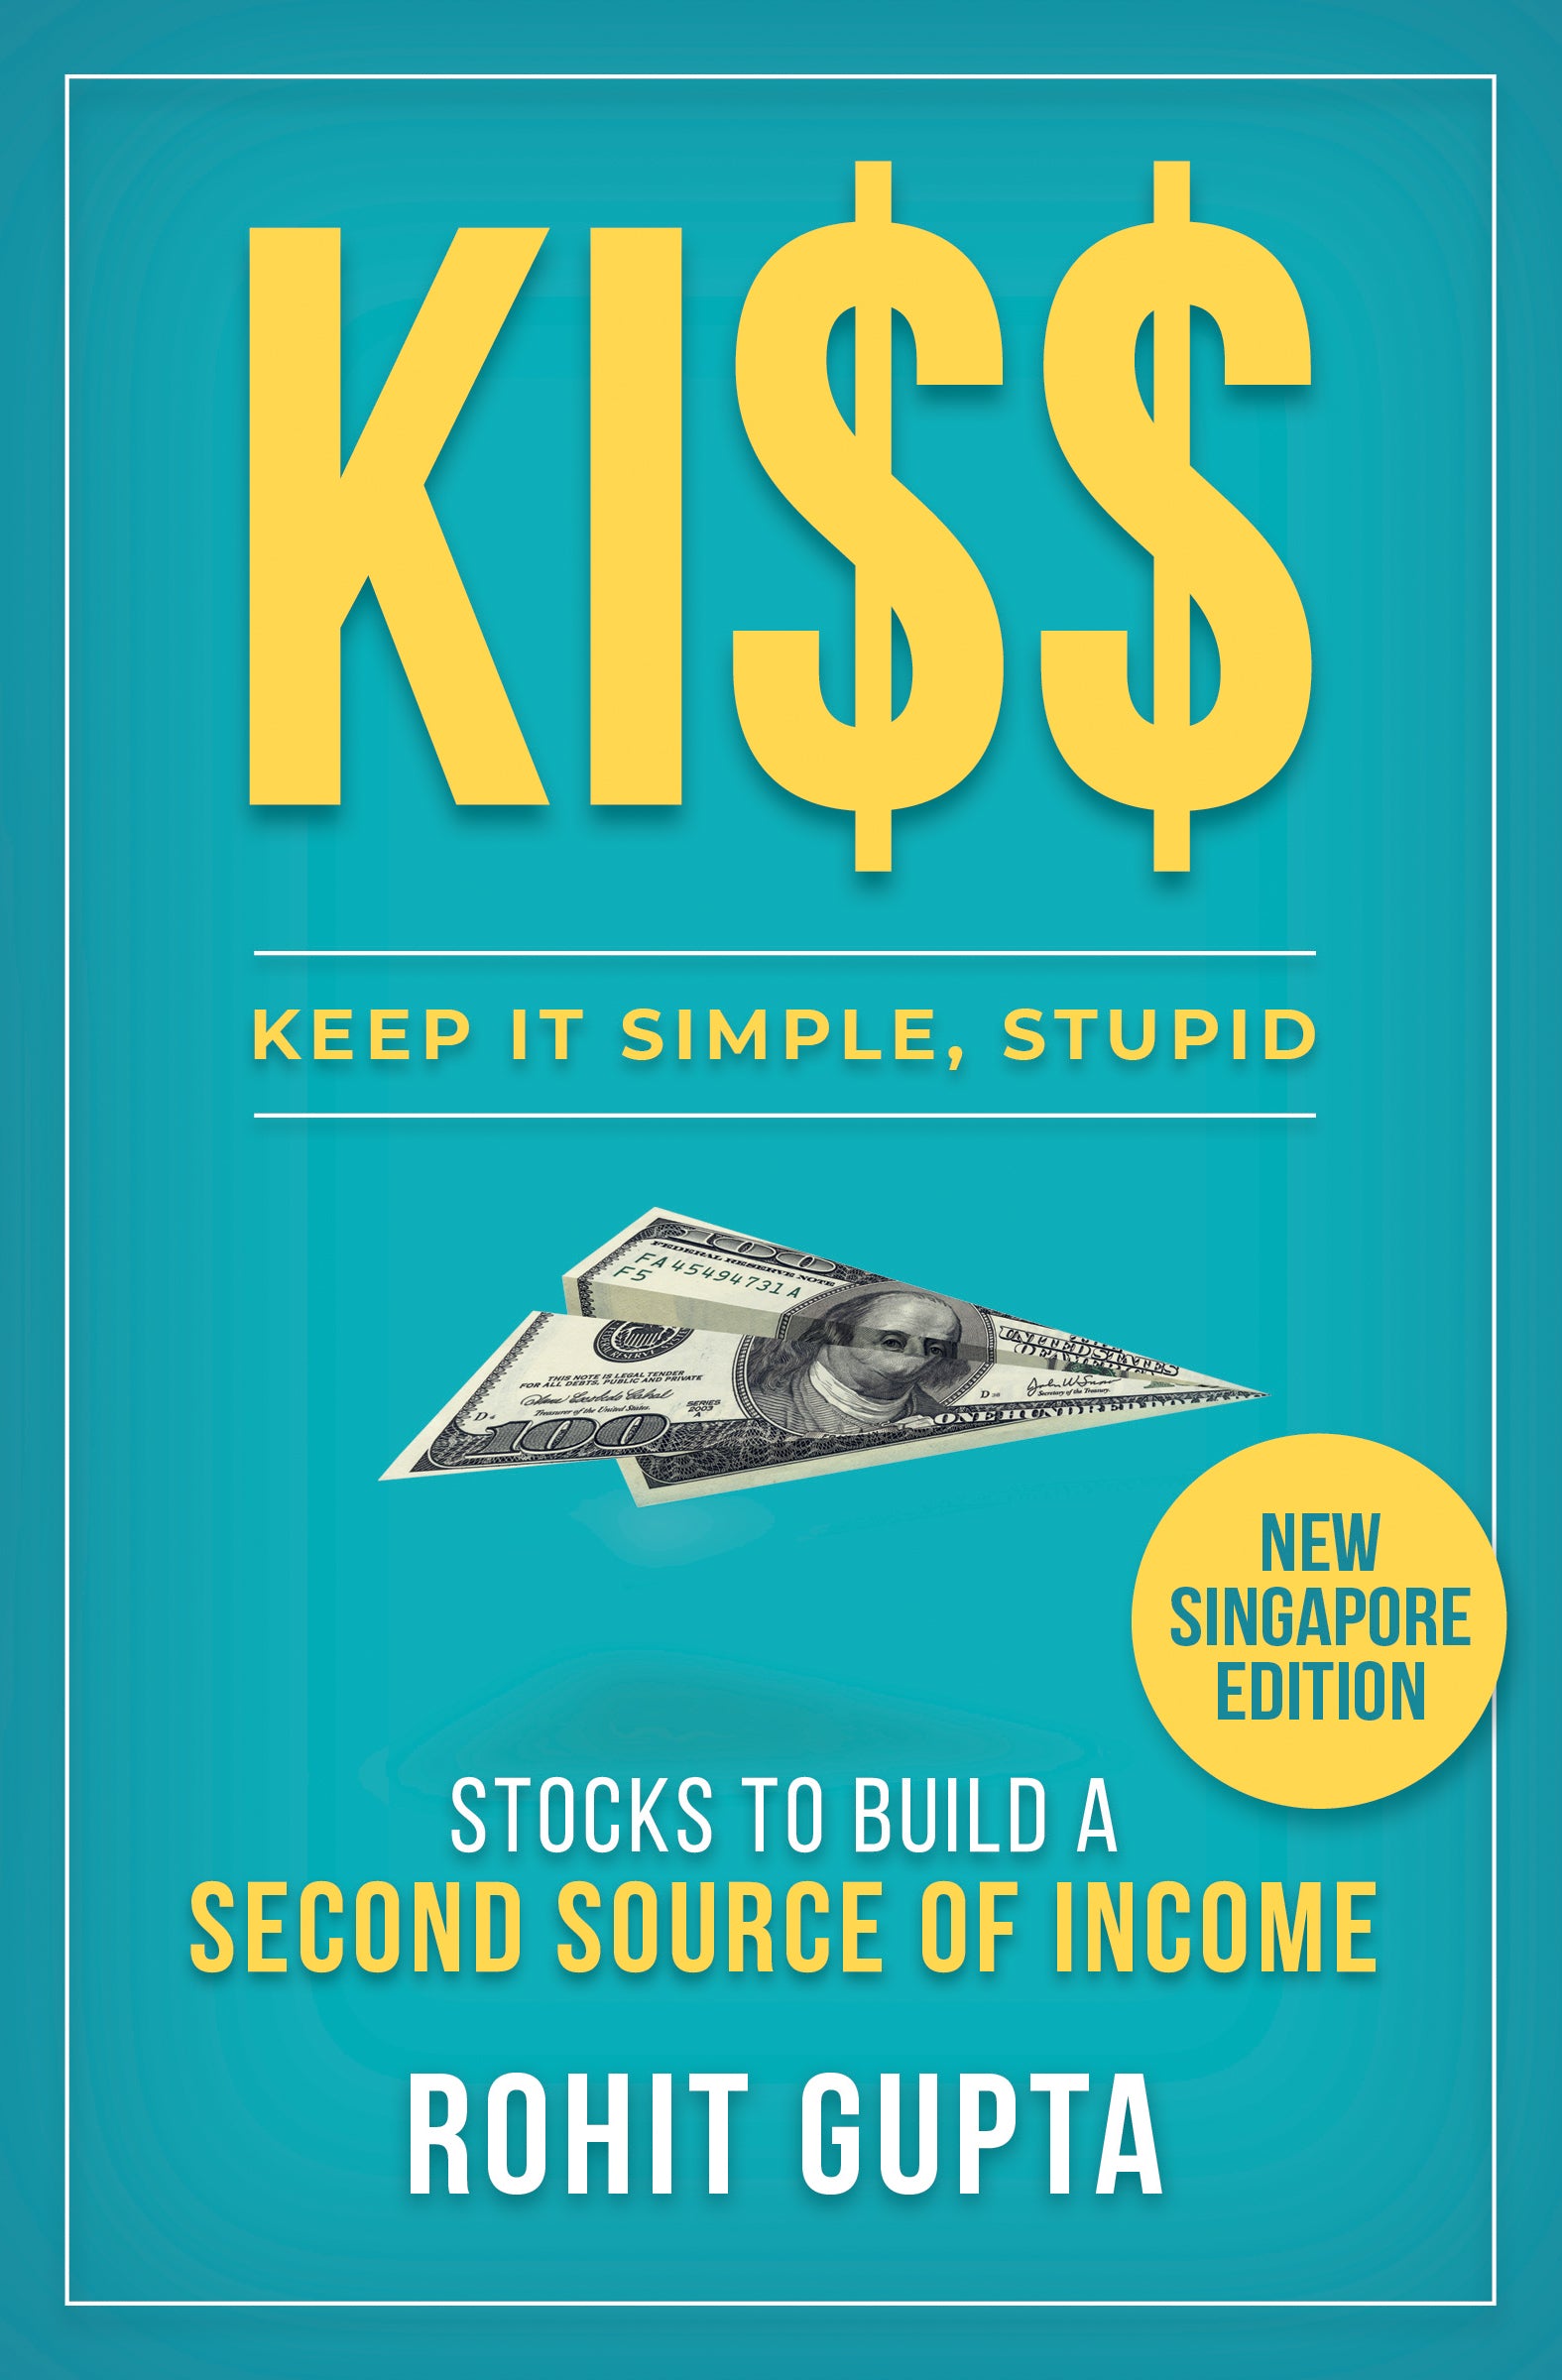 KISS (Keep It Simple, Stupid): Stocks To Build A Second Source Of Income